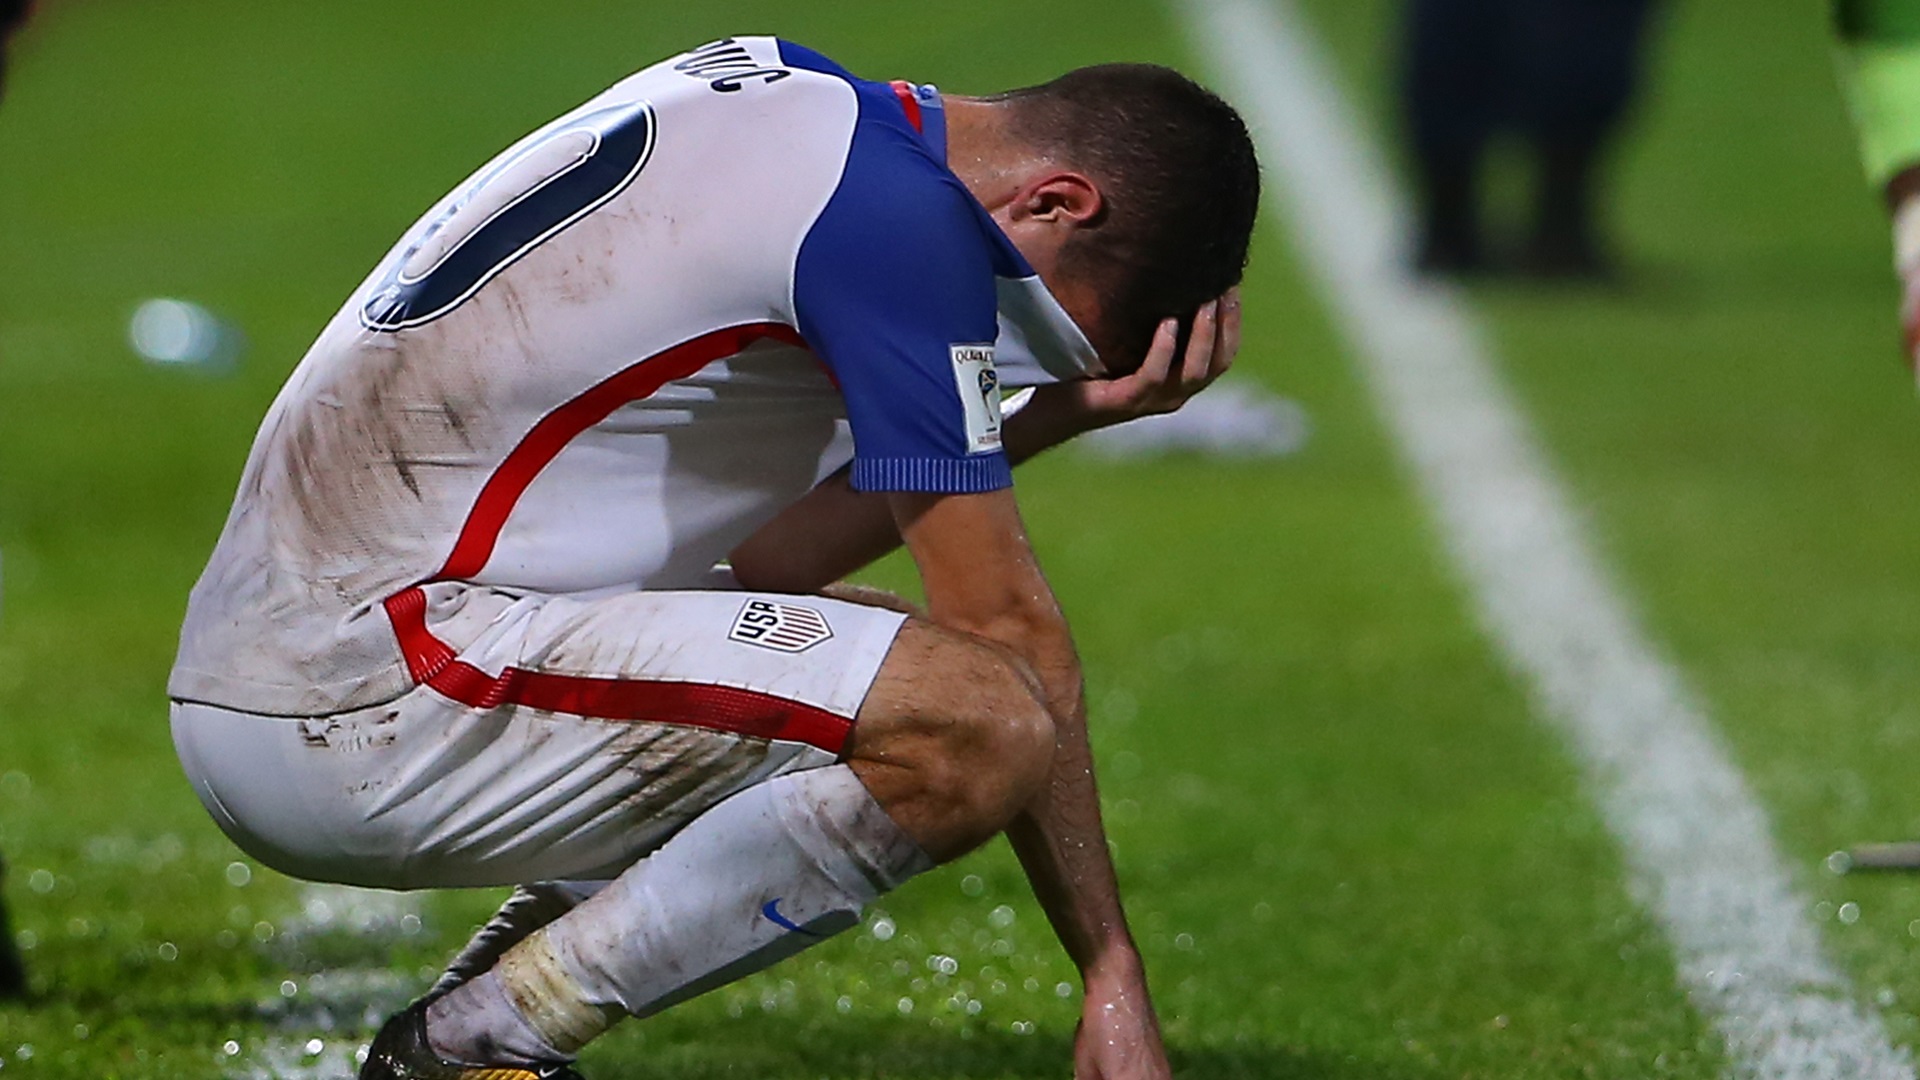 The Problems with US Soccer, Examined By an Englishman